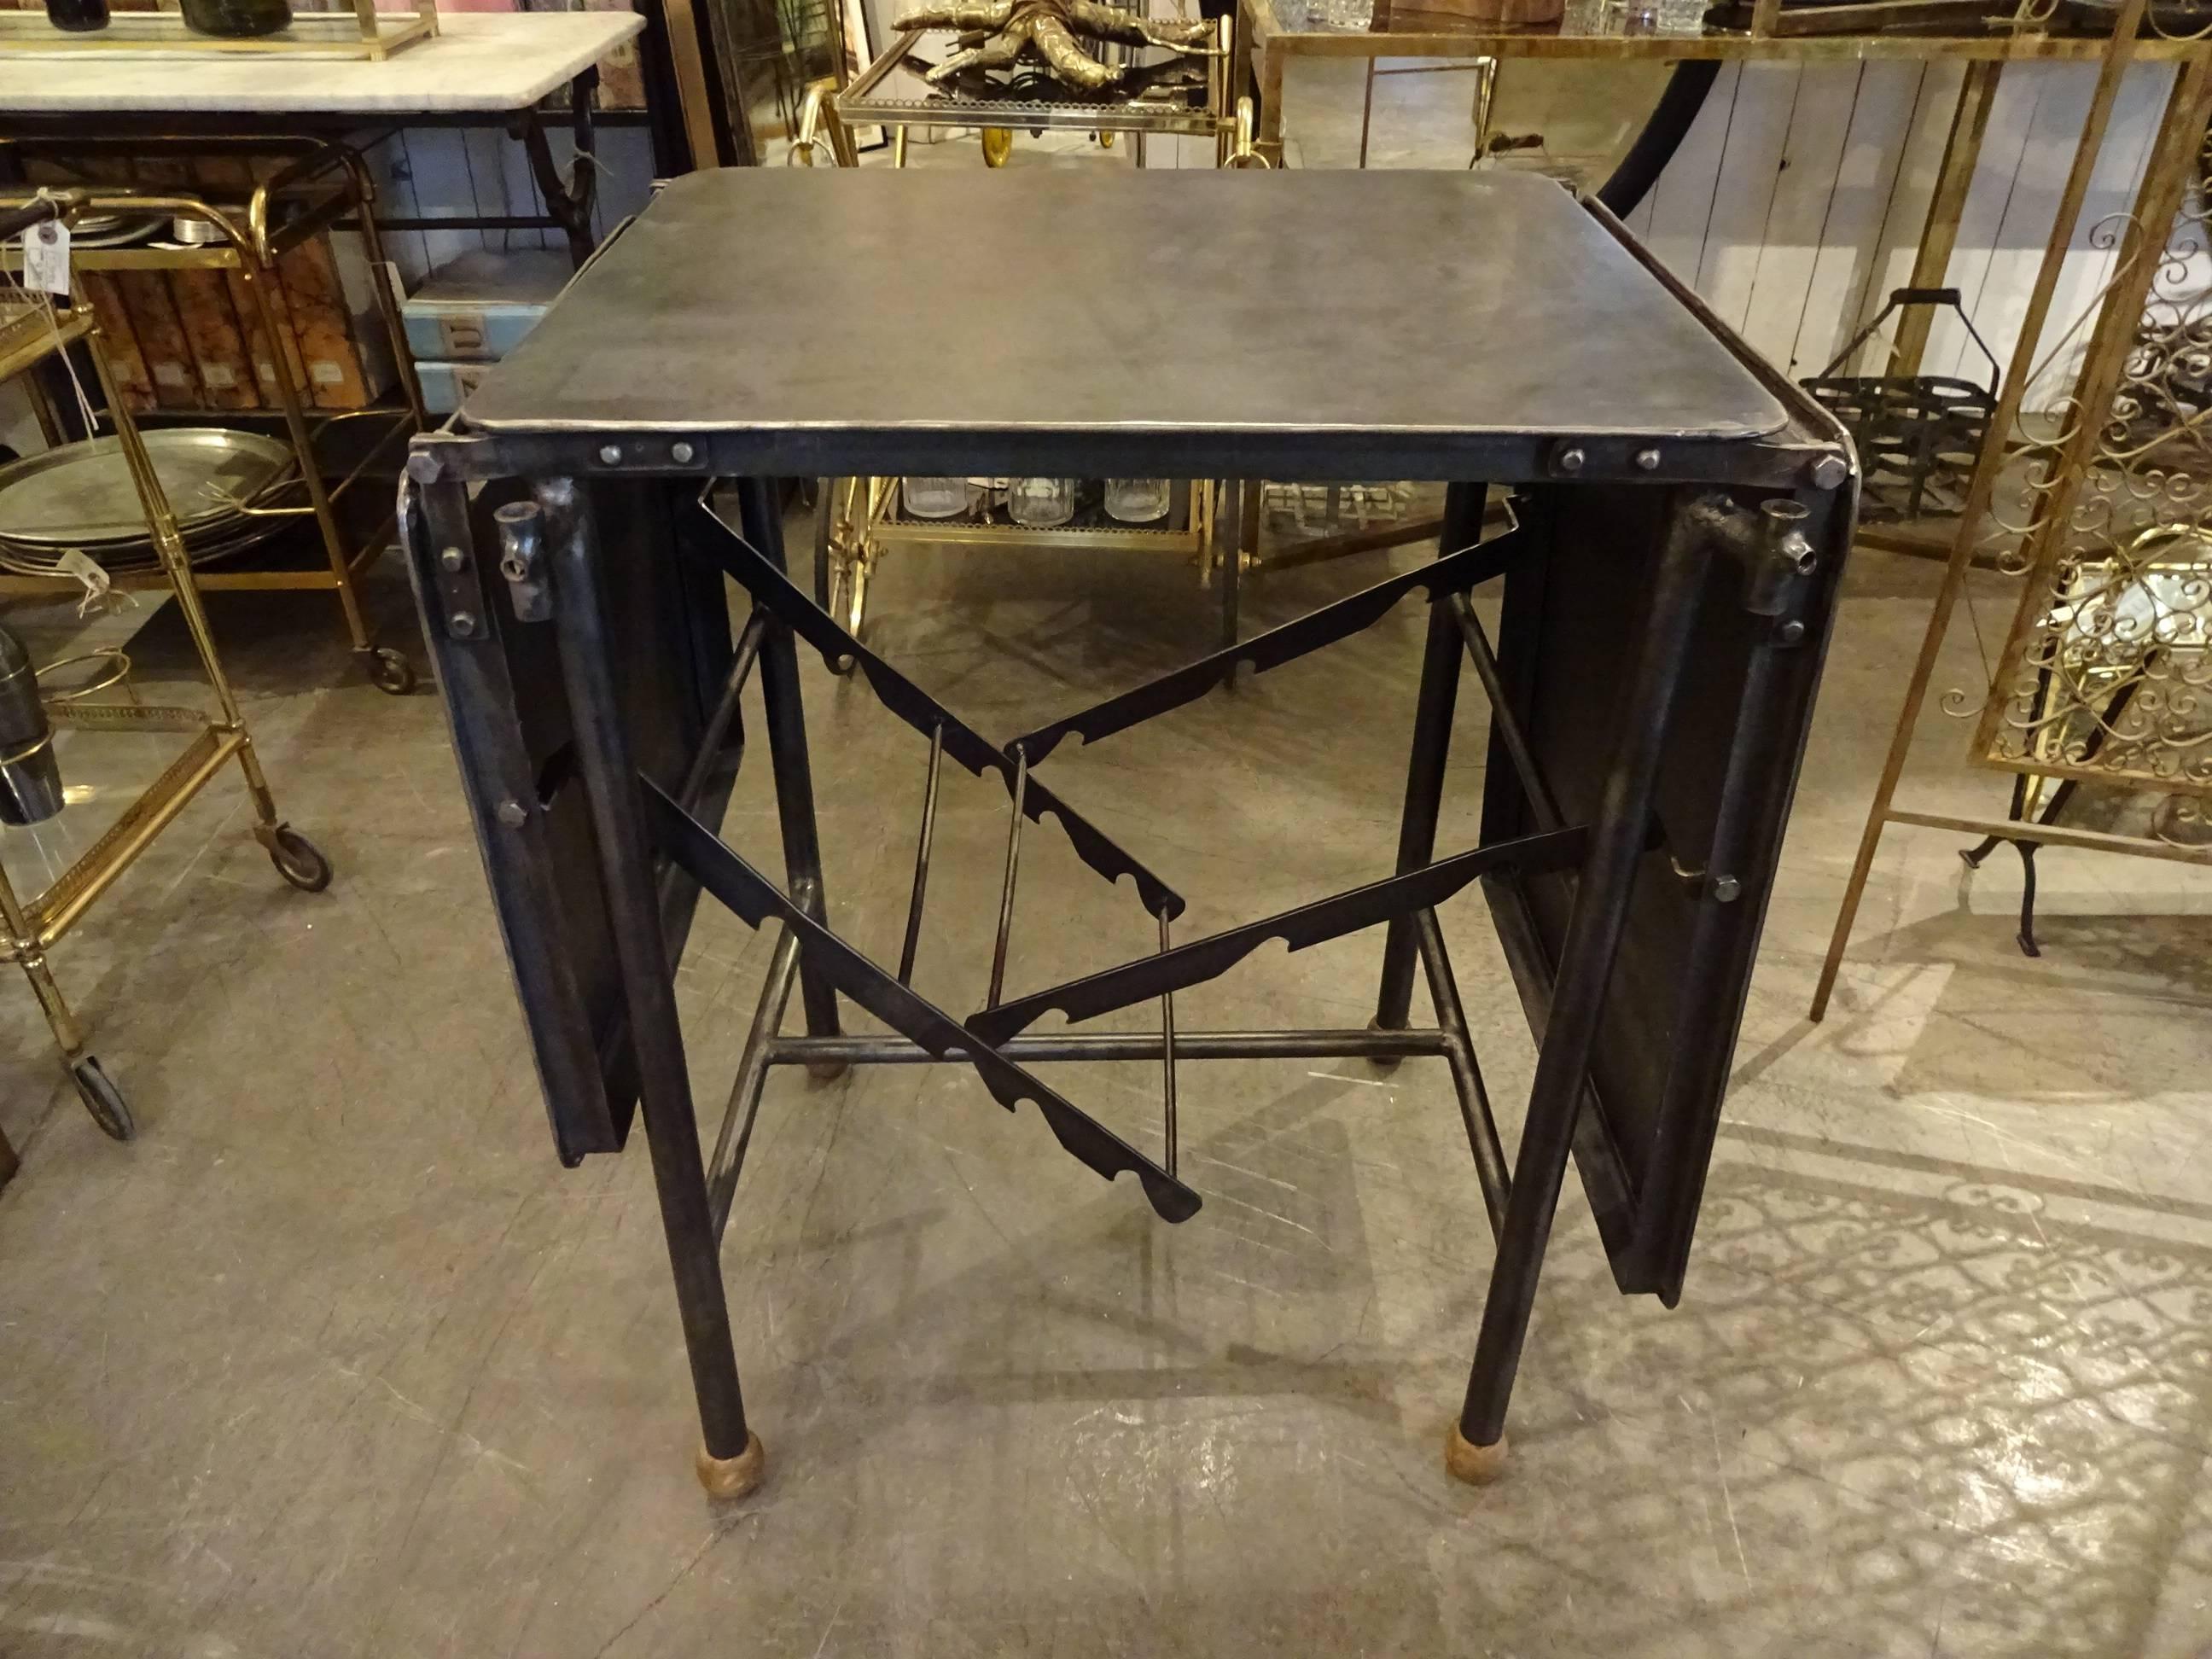 Old French Industrial metal table in a raw desiccated and polished metal surface. The table has one flap at each end, which can be folded down separately.

Measures: H 80 x L 168 x W 51 cm.